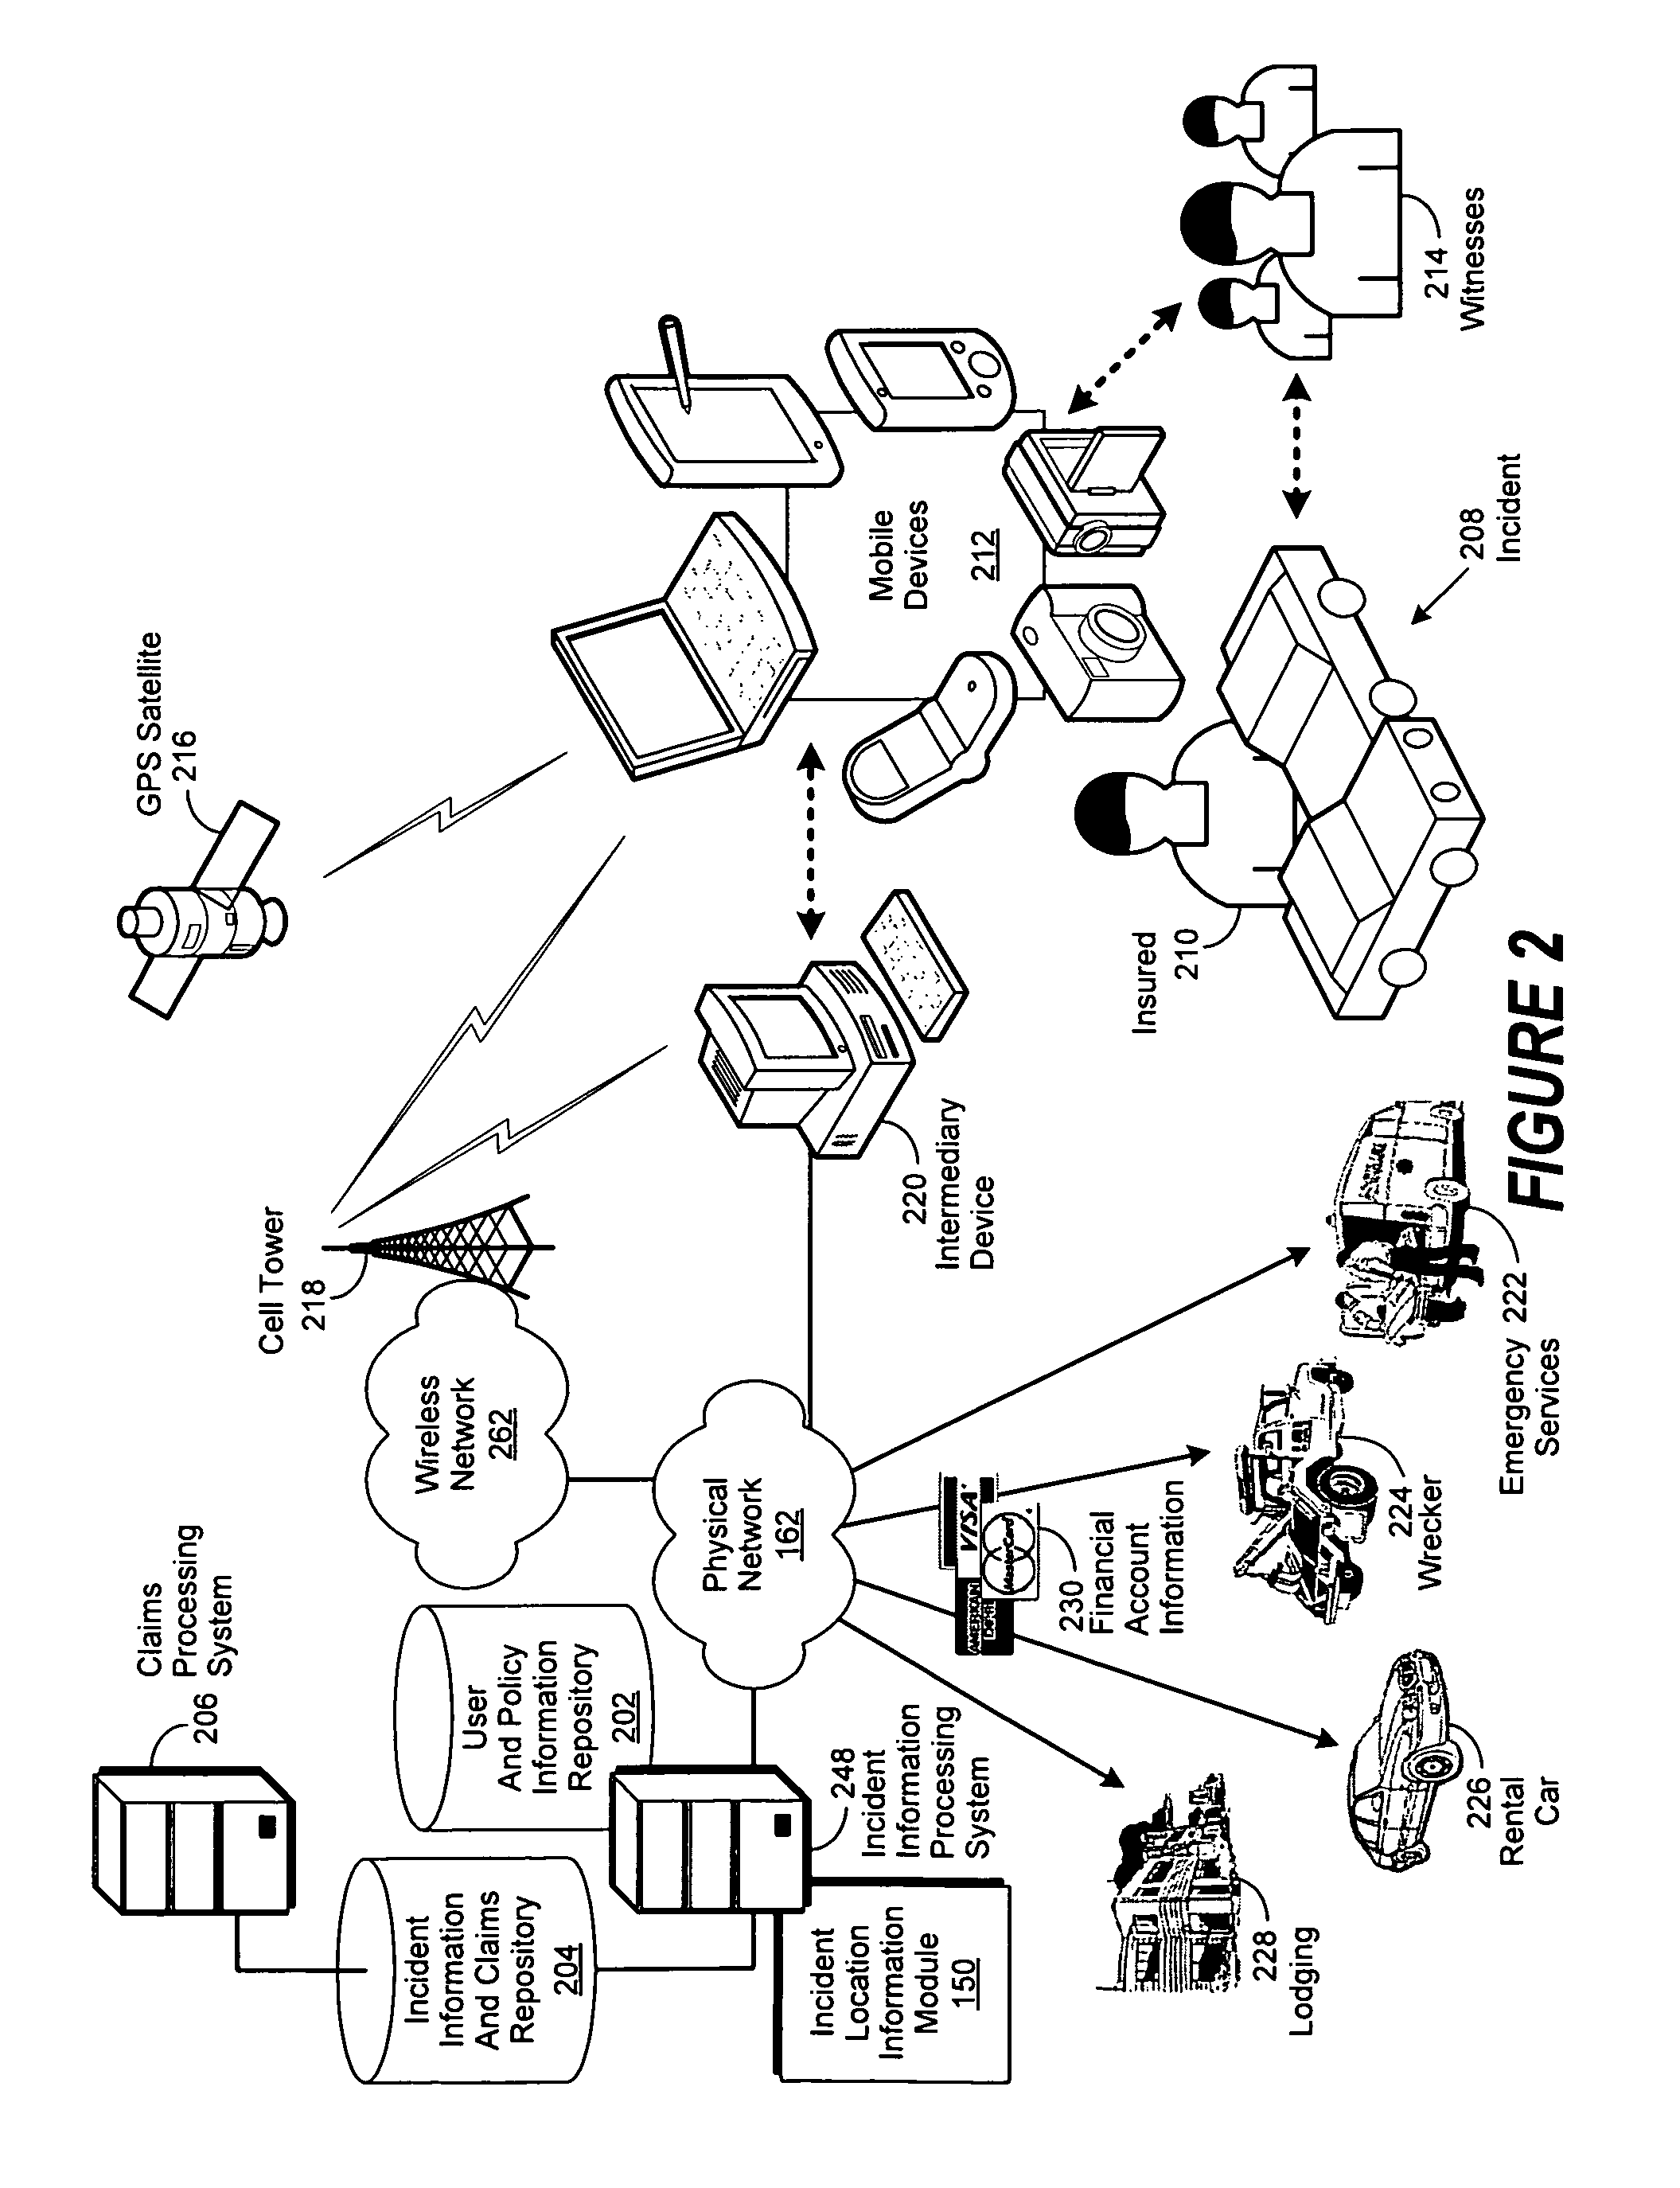 Systems and methods for claims processing via mobile device